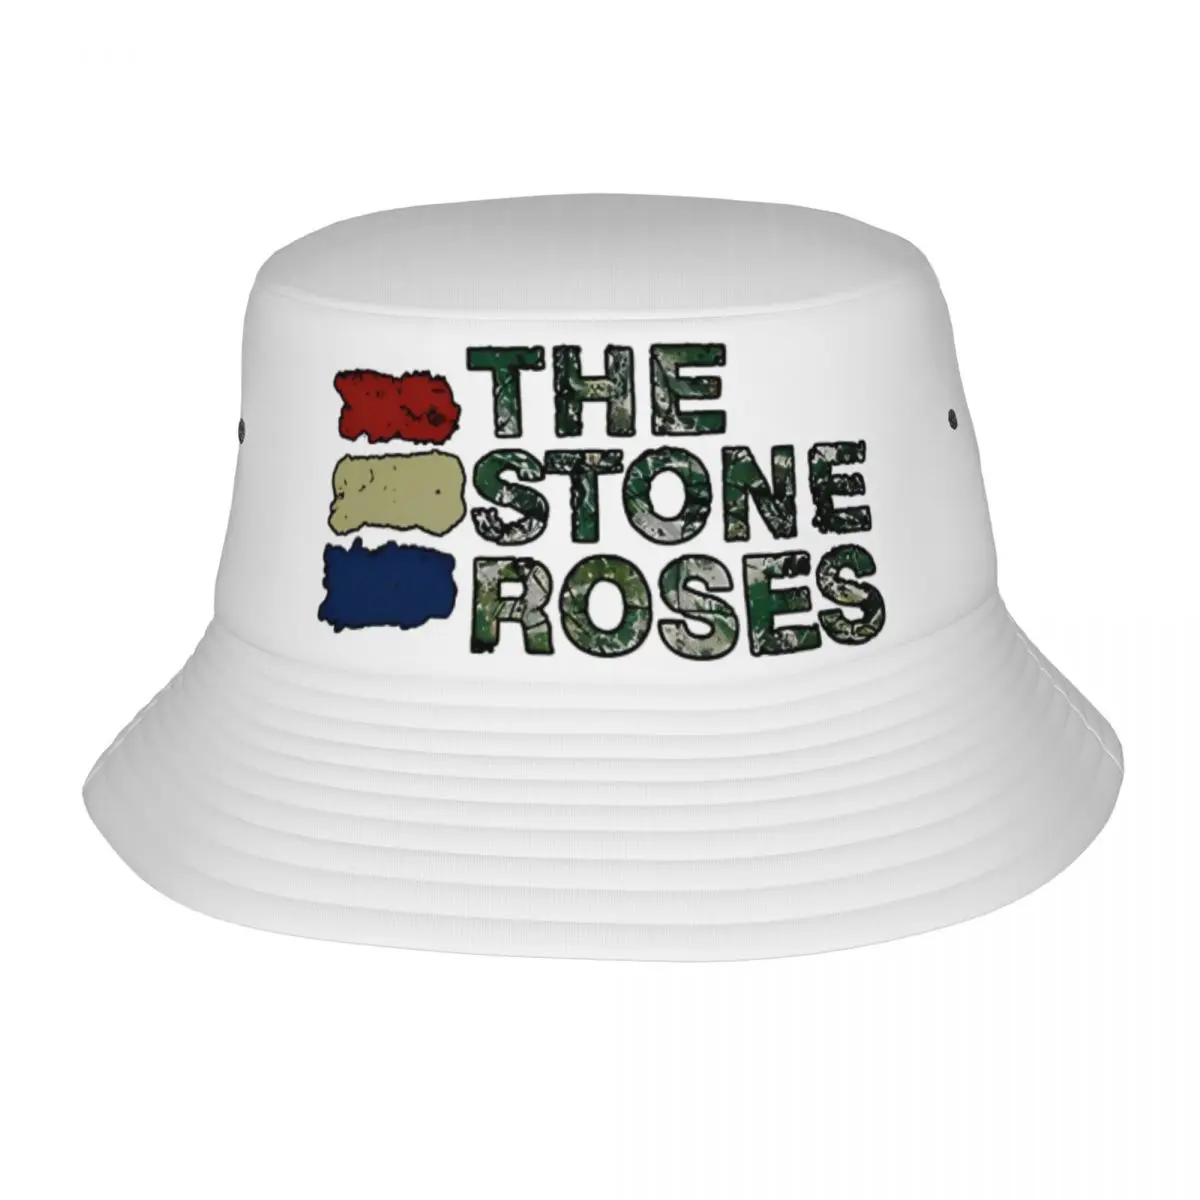 Best Seller Of English Rock Bucket Hat For Couple The Stone Roses Fisherman Hats Travel Hiking Caps Foldable Printed Sun Hats